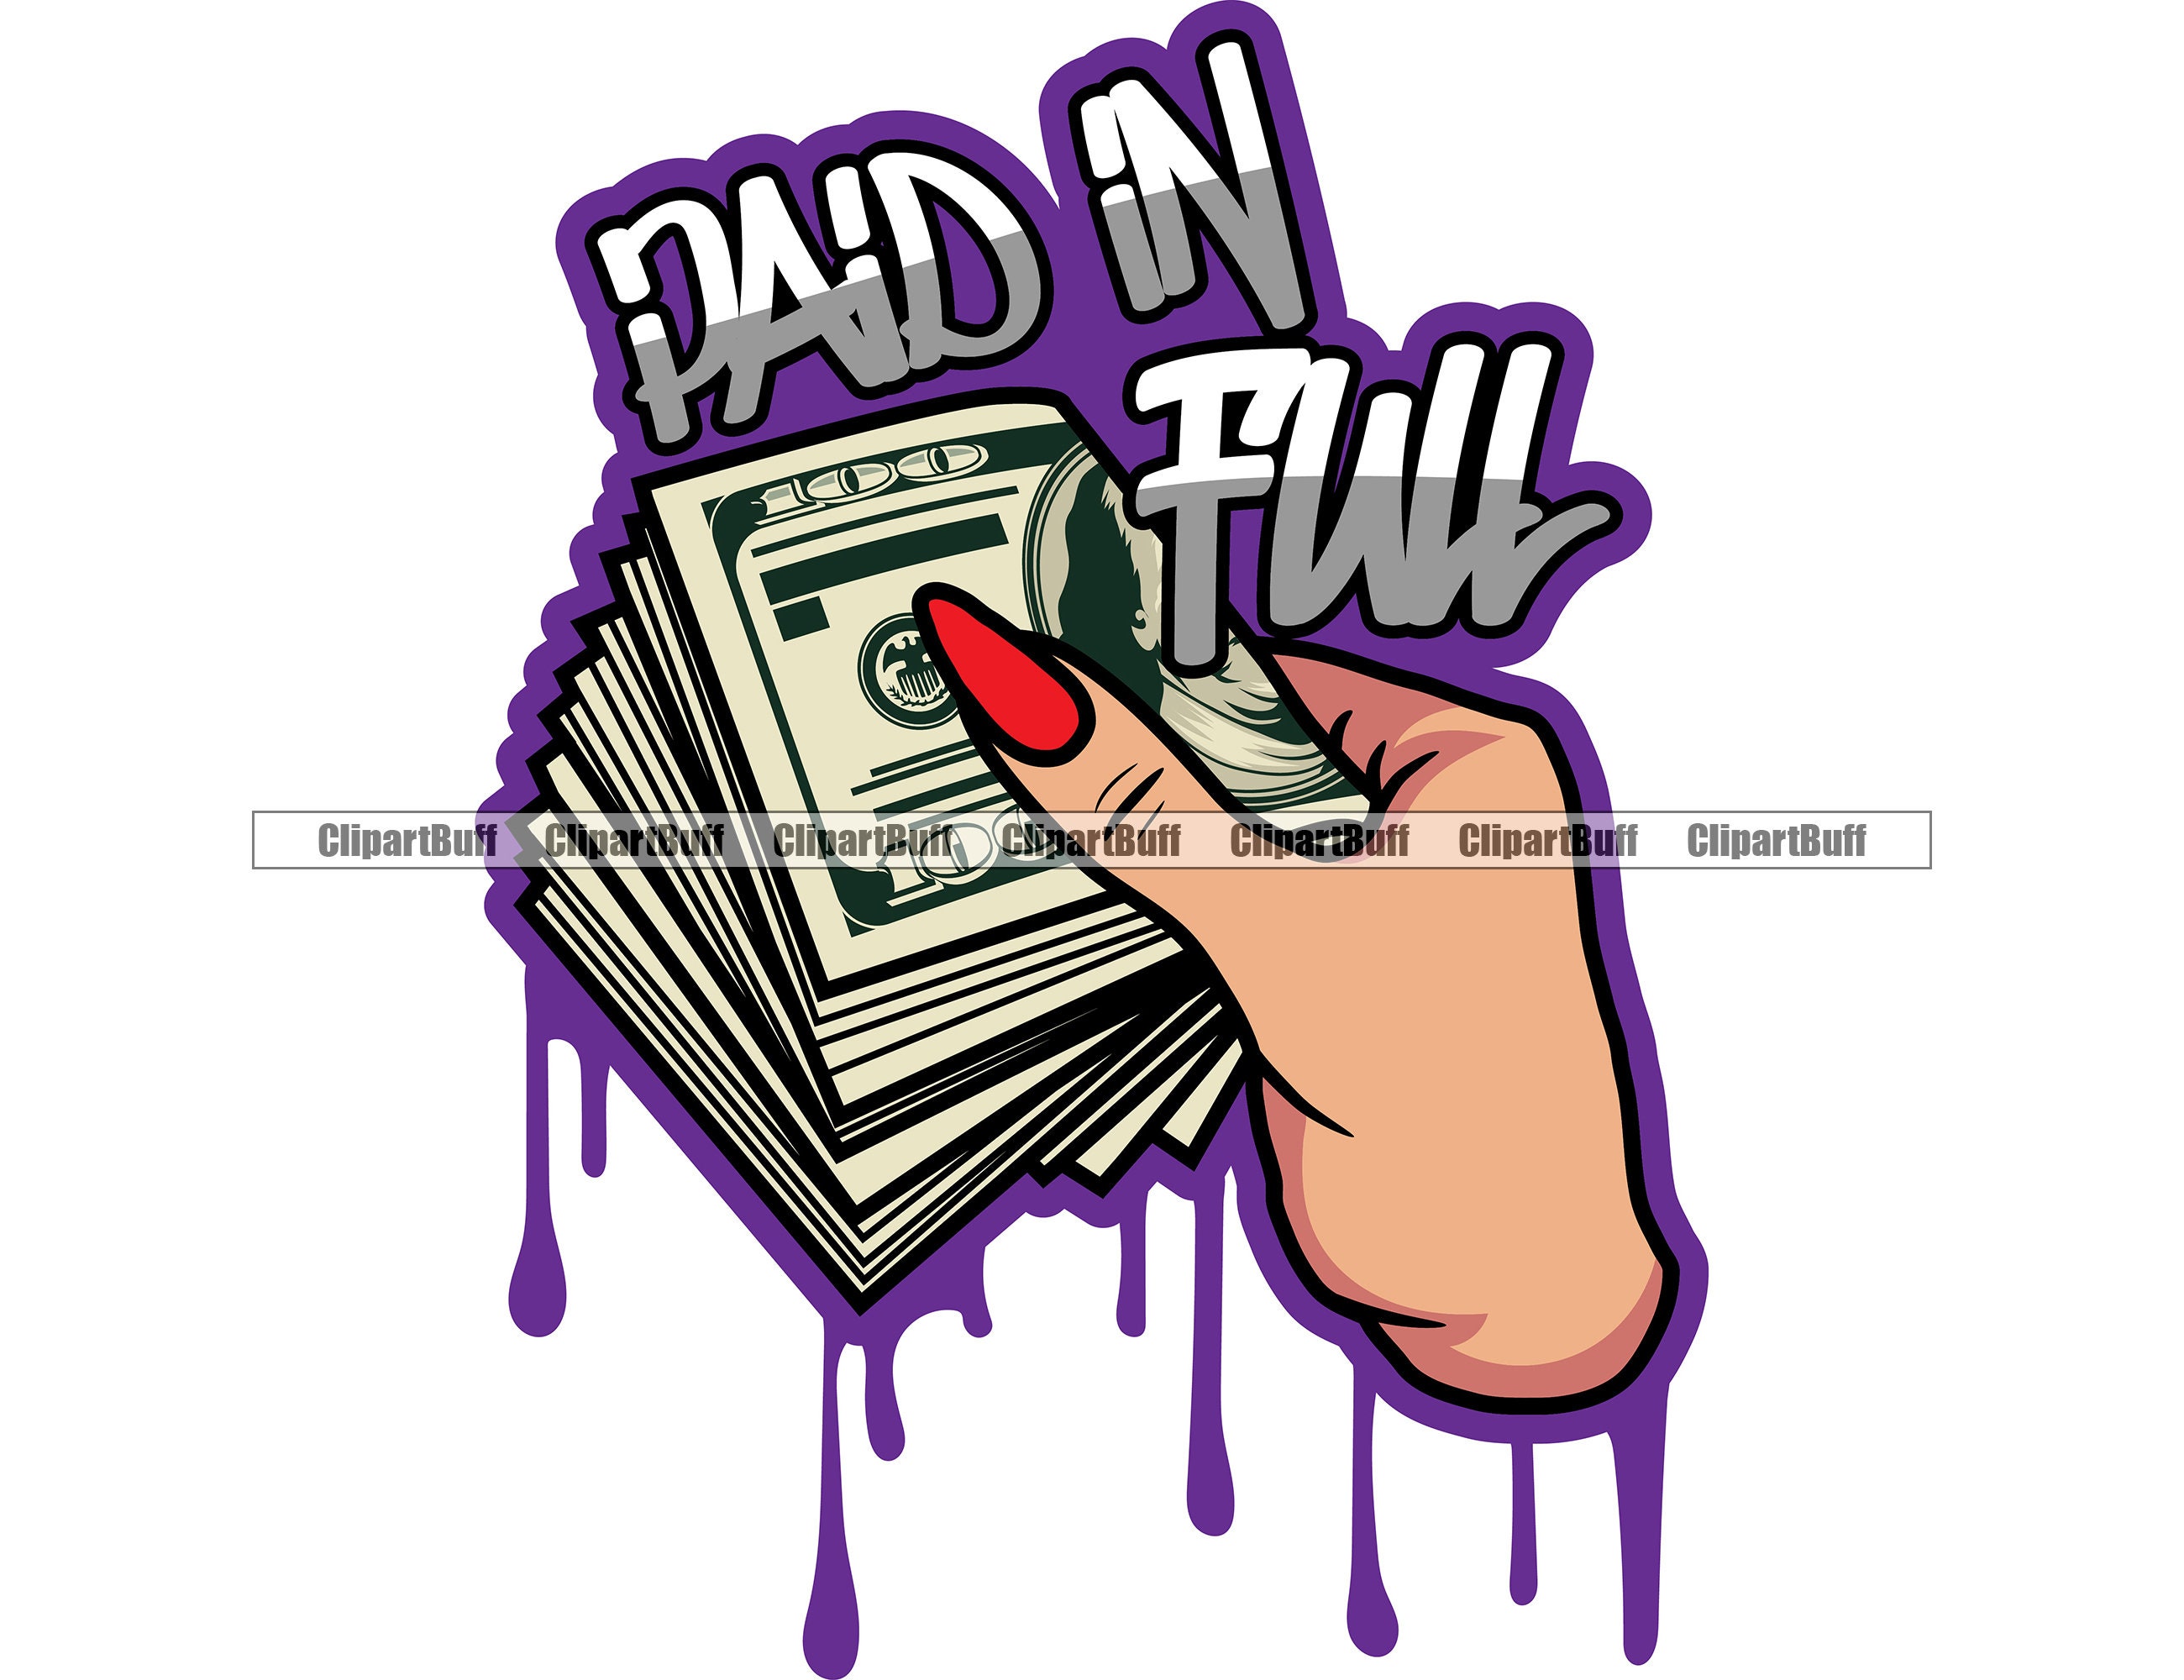 Box PAID IN FULL Thank You Stamp –